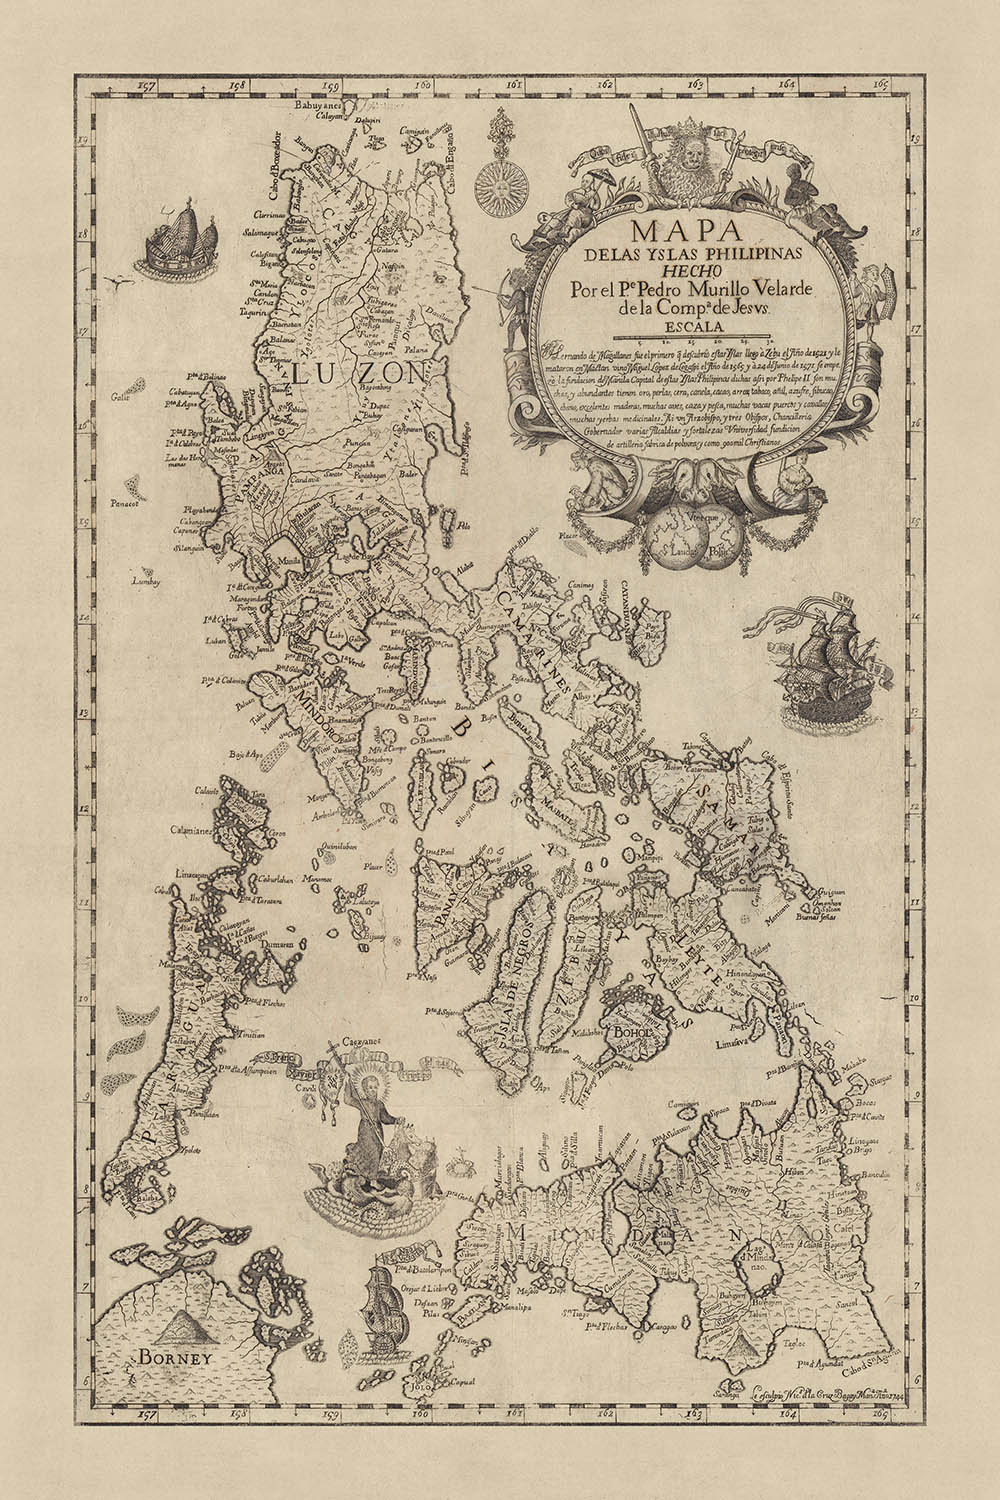 Old Map of the Philippines, 1744: Reduced Version of 1734 Murillo Velarde Chart